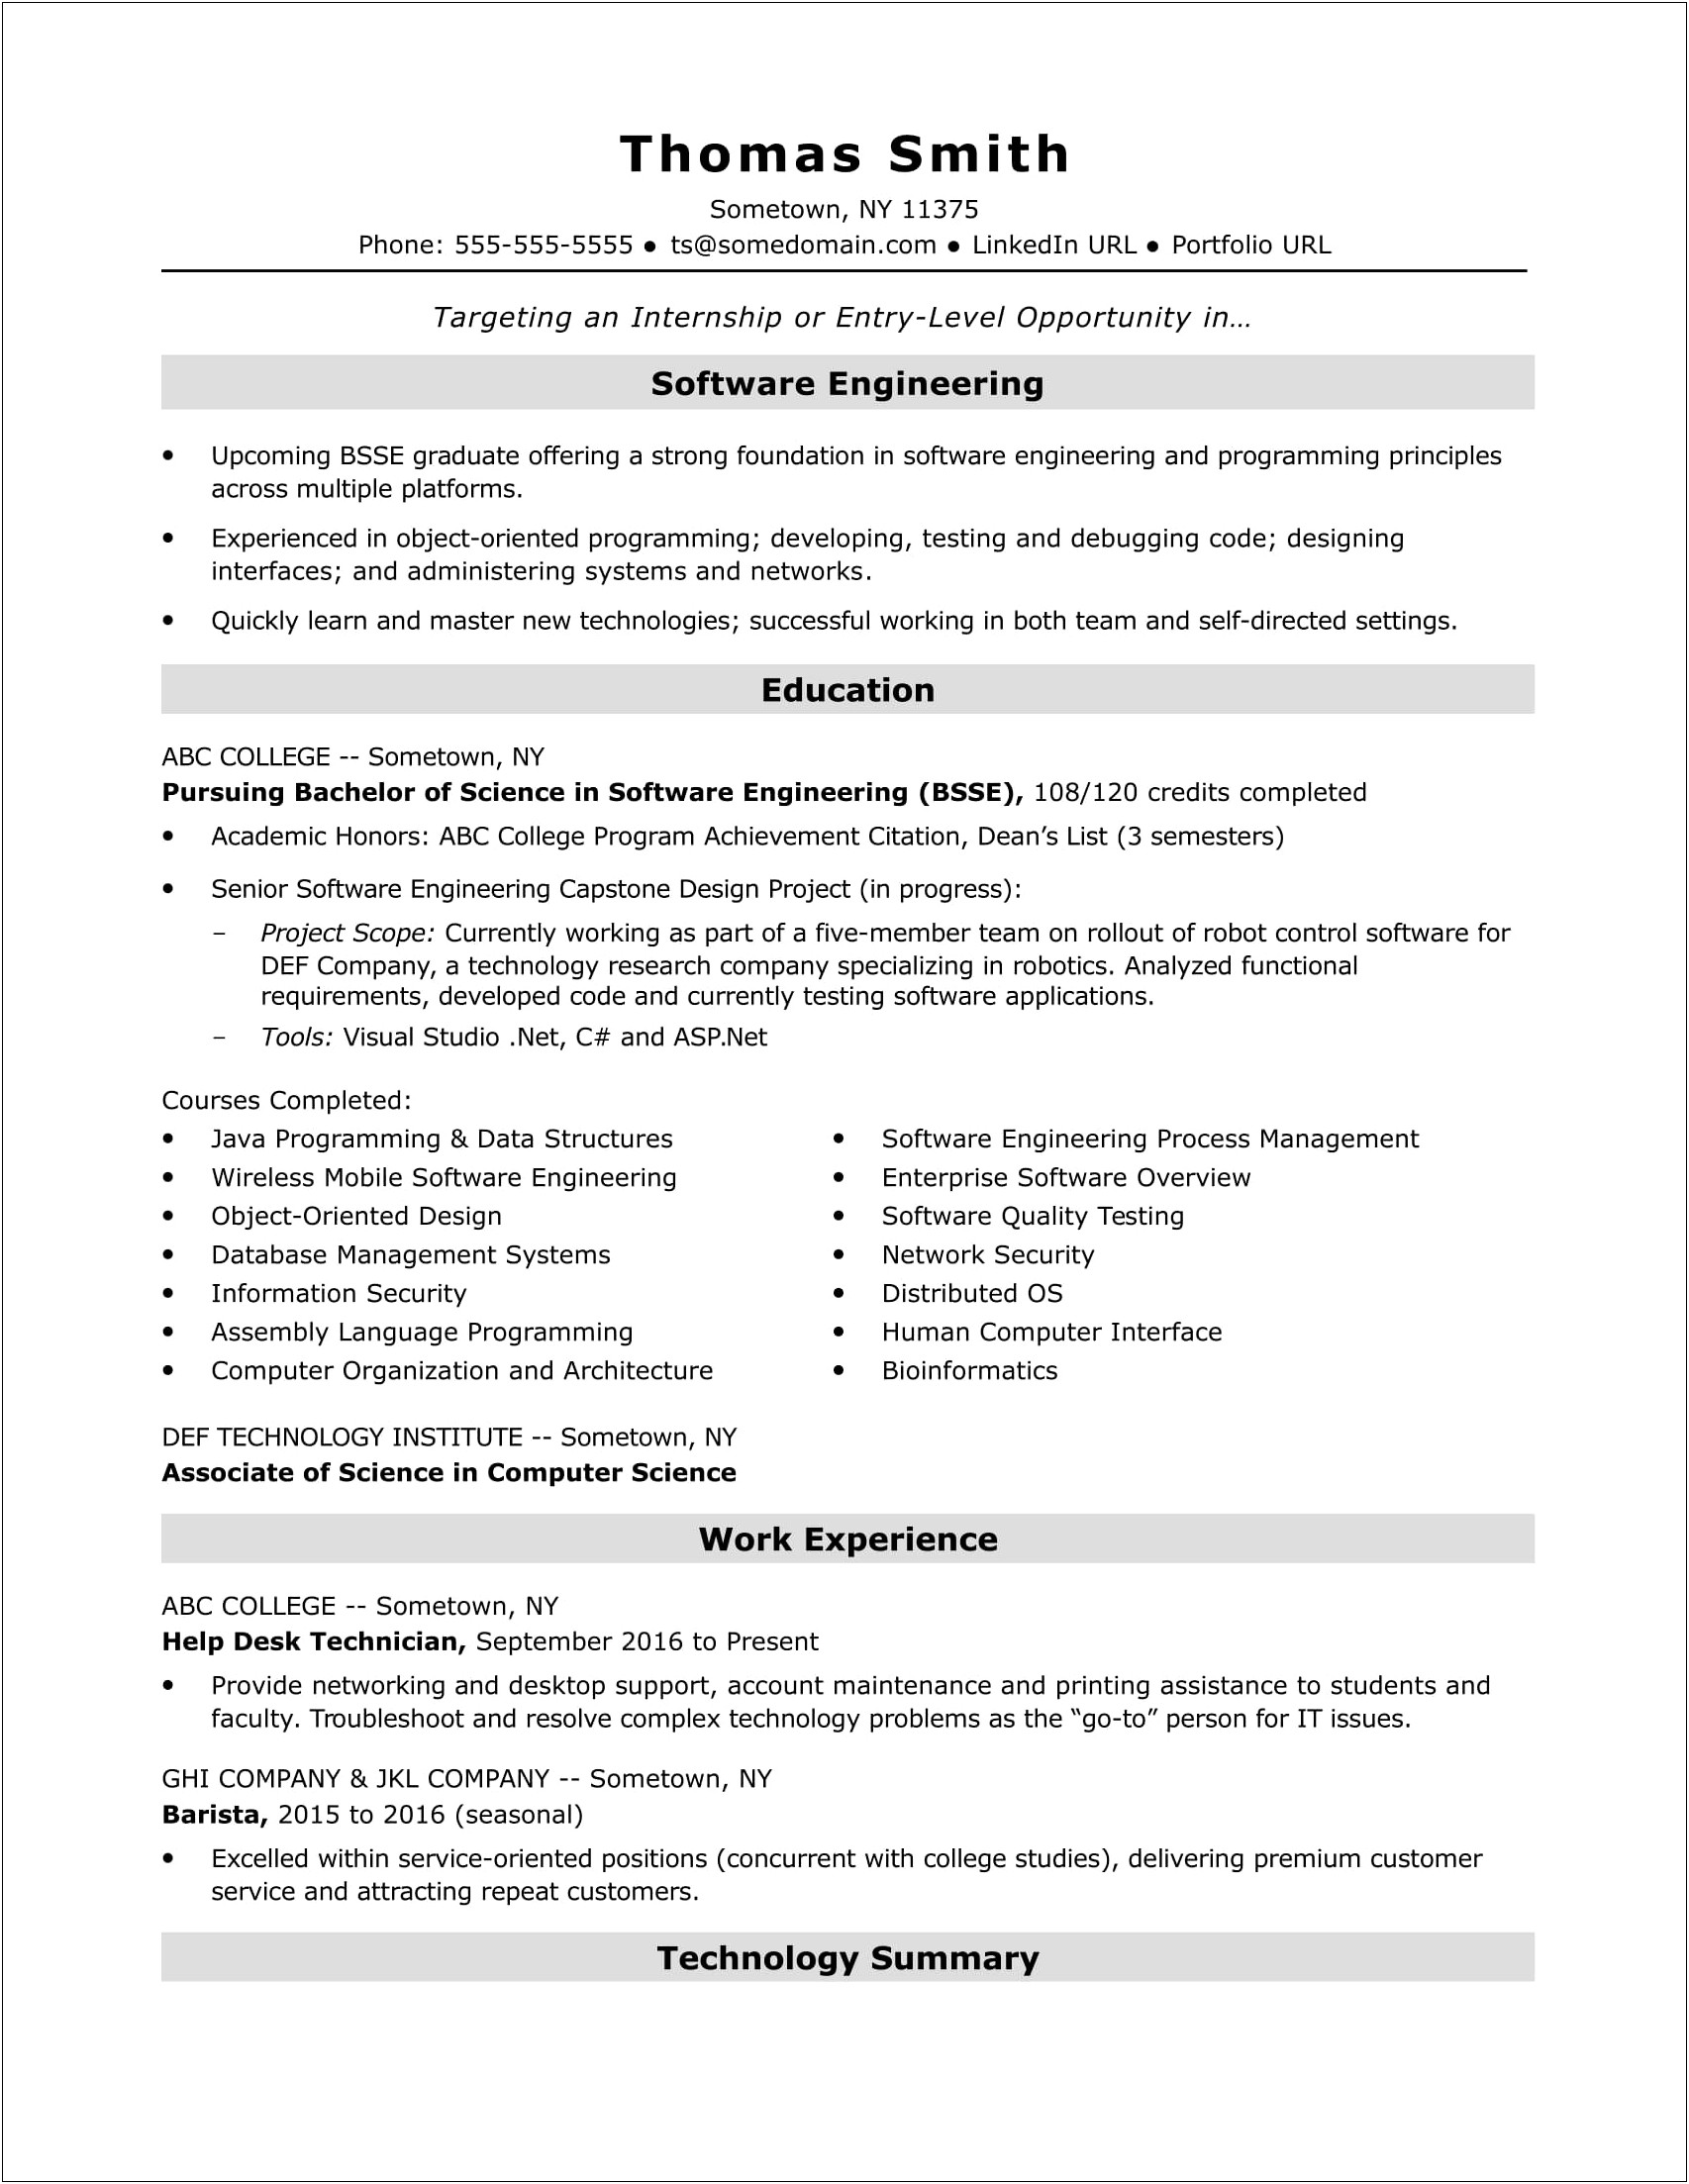 Skill Summary Resume For Computer Science